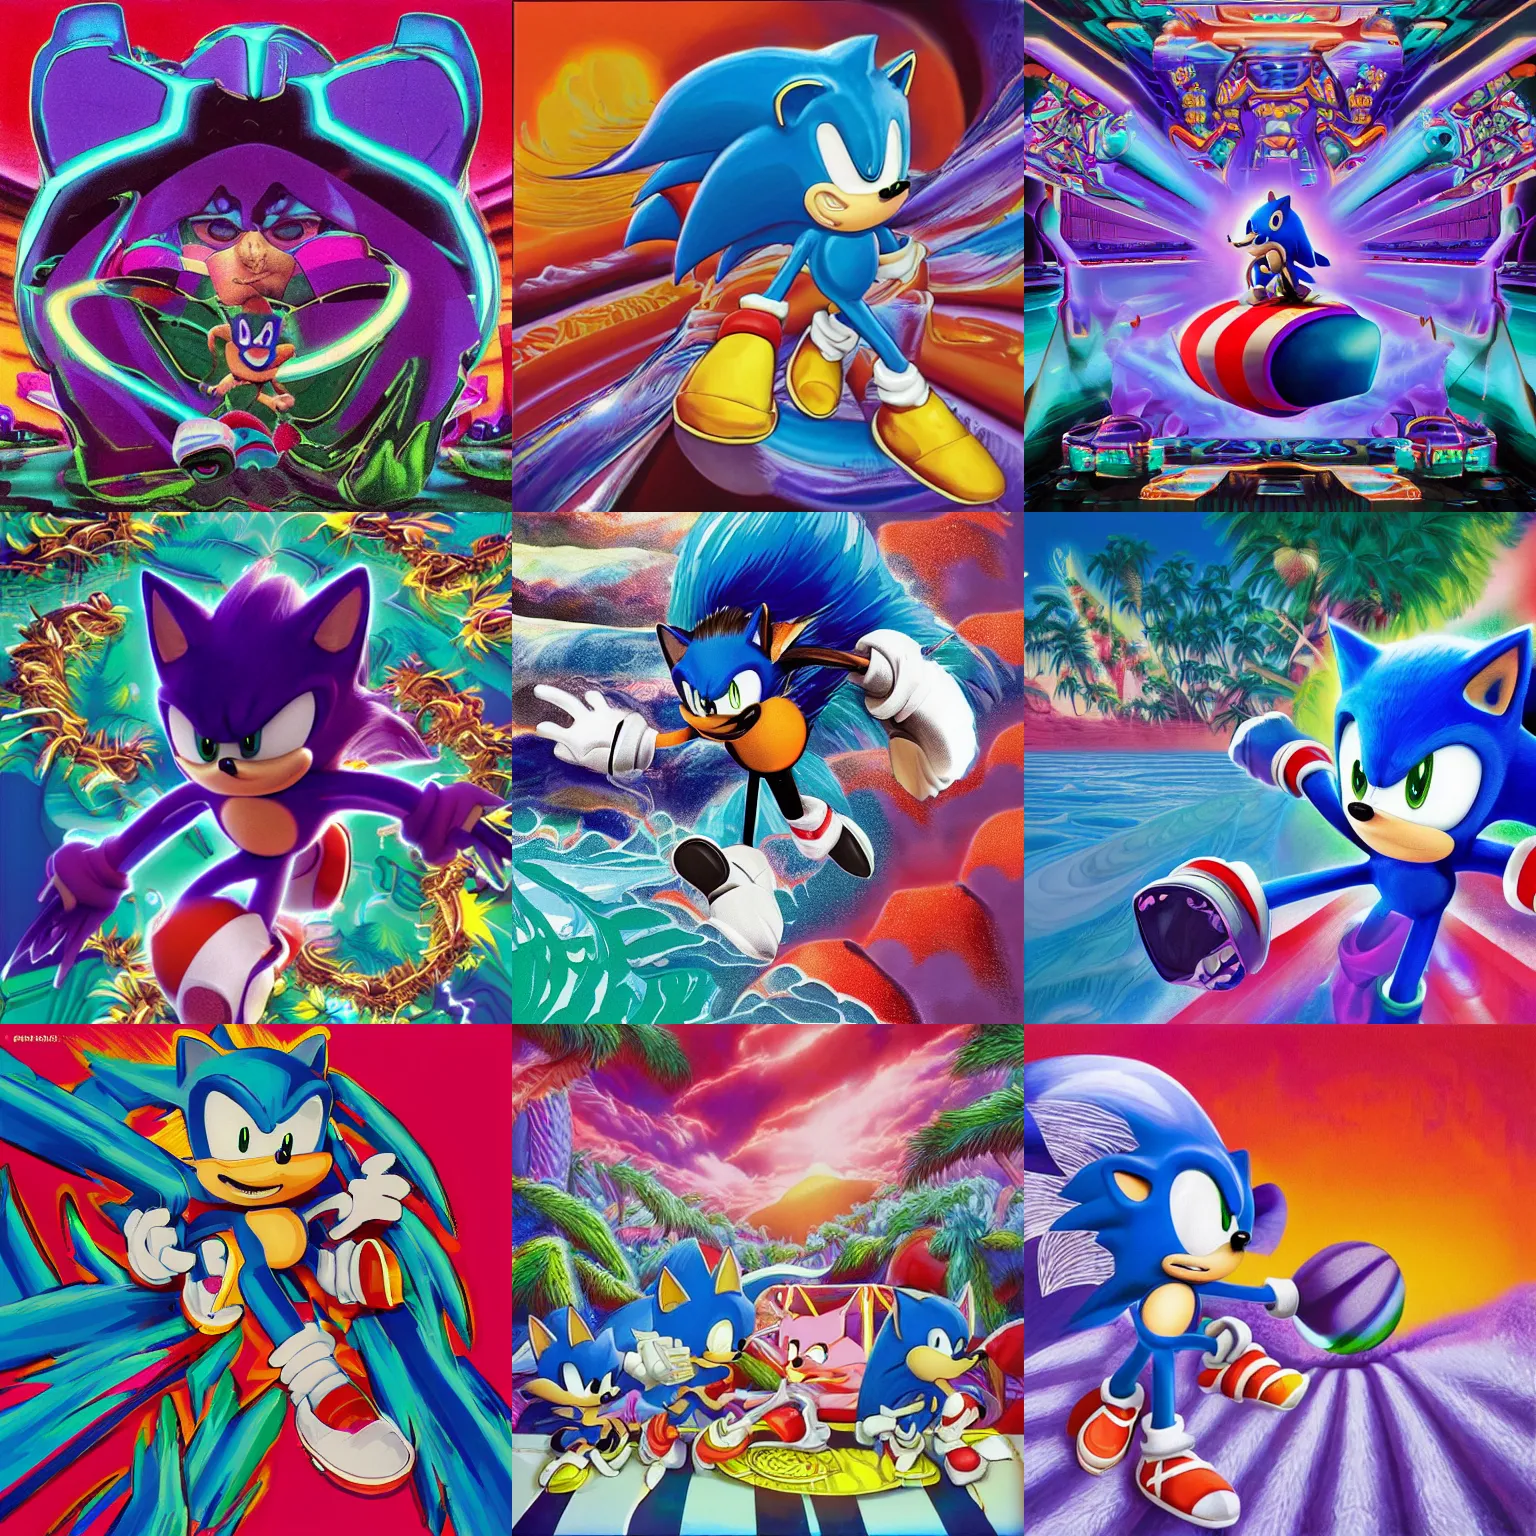 Prompt: sonic the hedgehog portrait in a recursive surreal, sharp, detailed professional, high quality airbrush art MGMT tame impala album cover of a liquid dissolving synthwave vaporwave LSD DMT sonic the hedgehog surfing through cyberspace, purple checkerboard background, 1990s 1992 Sega Genesis video game album cover,